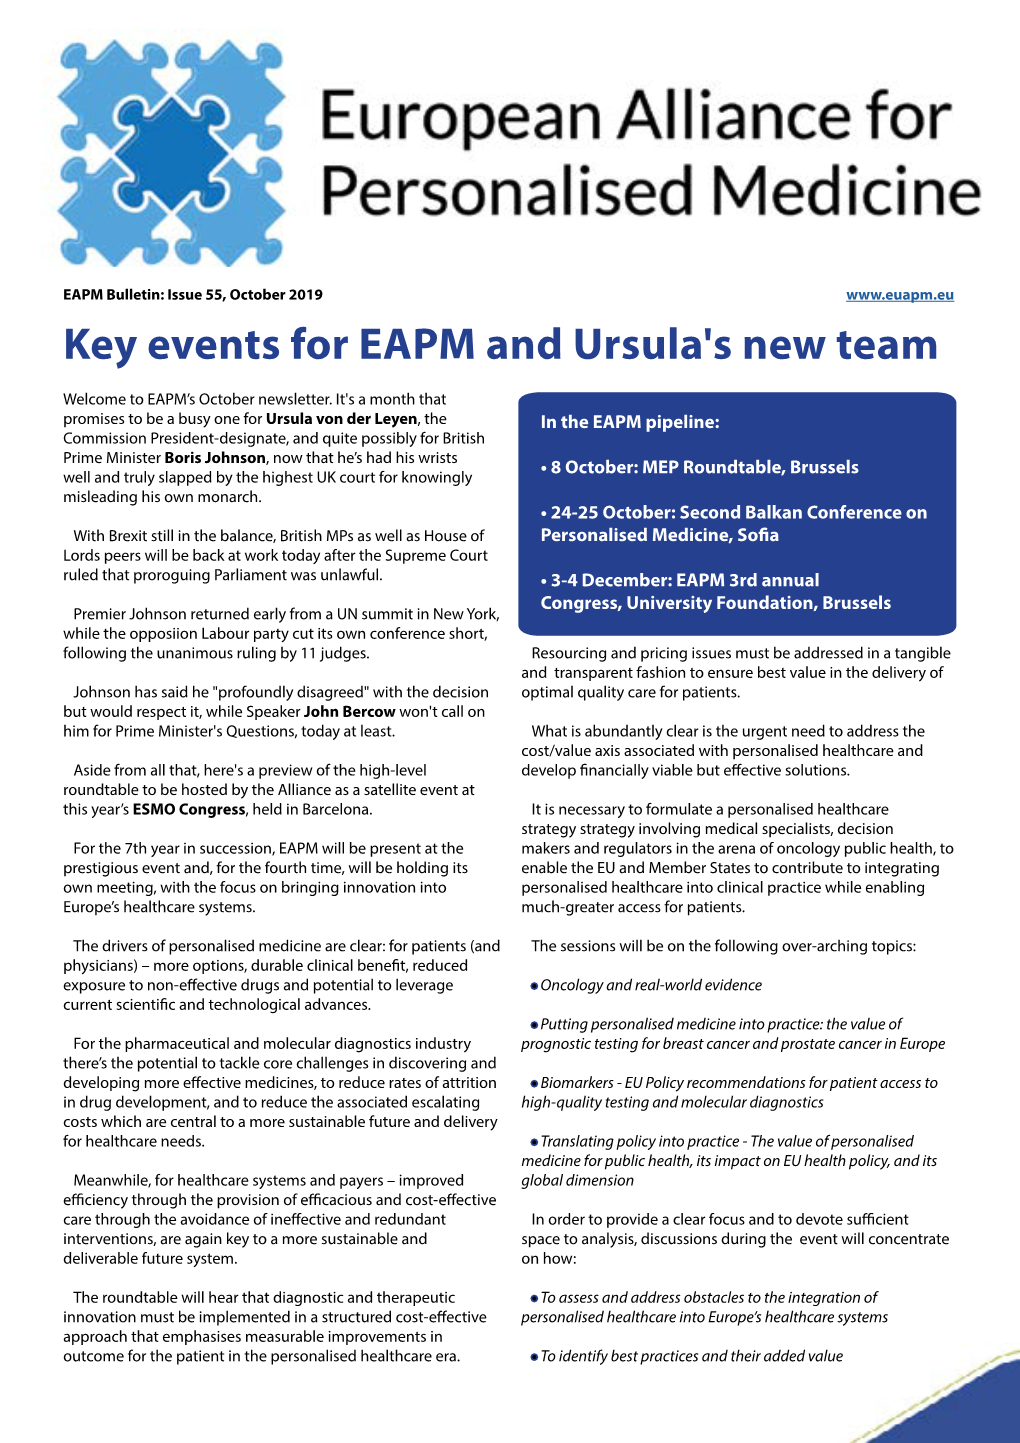 EAPM Bulletin: Issue 55, October 2019 Key Events for EAPM and Ursula's New Team